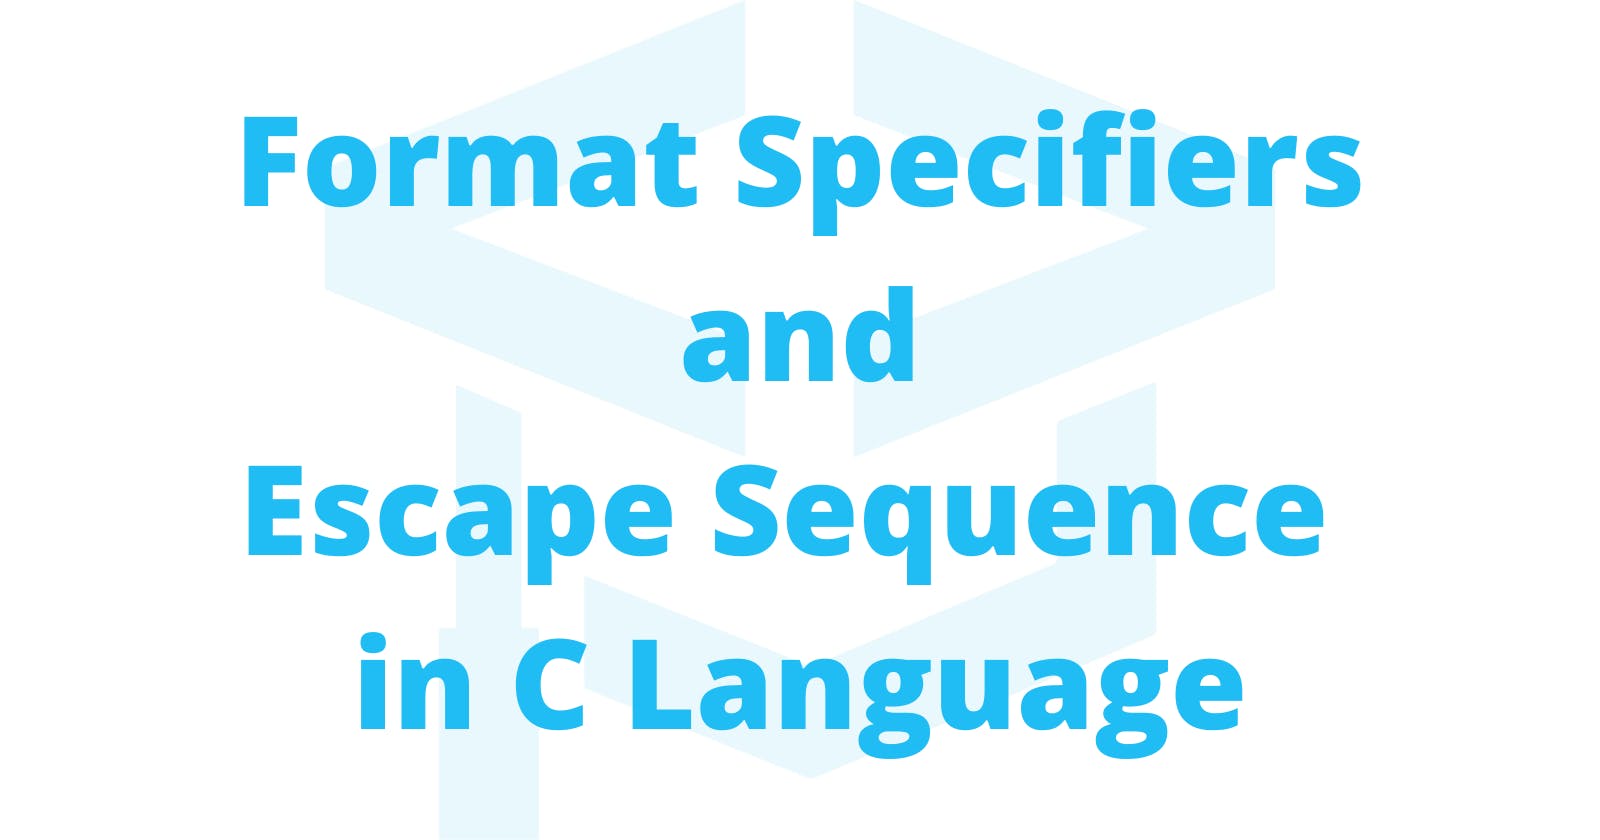 Format Specifiers and Escape Sequence in C Language